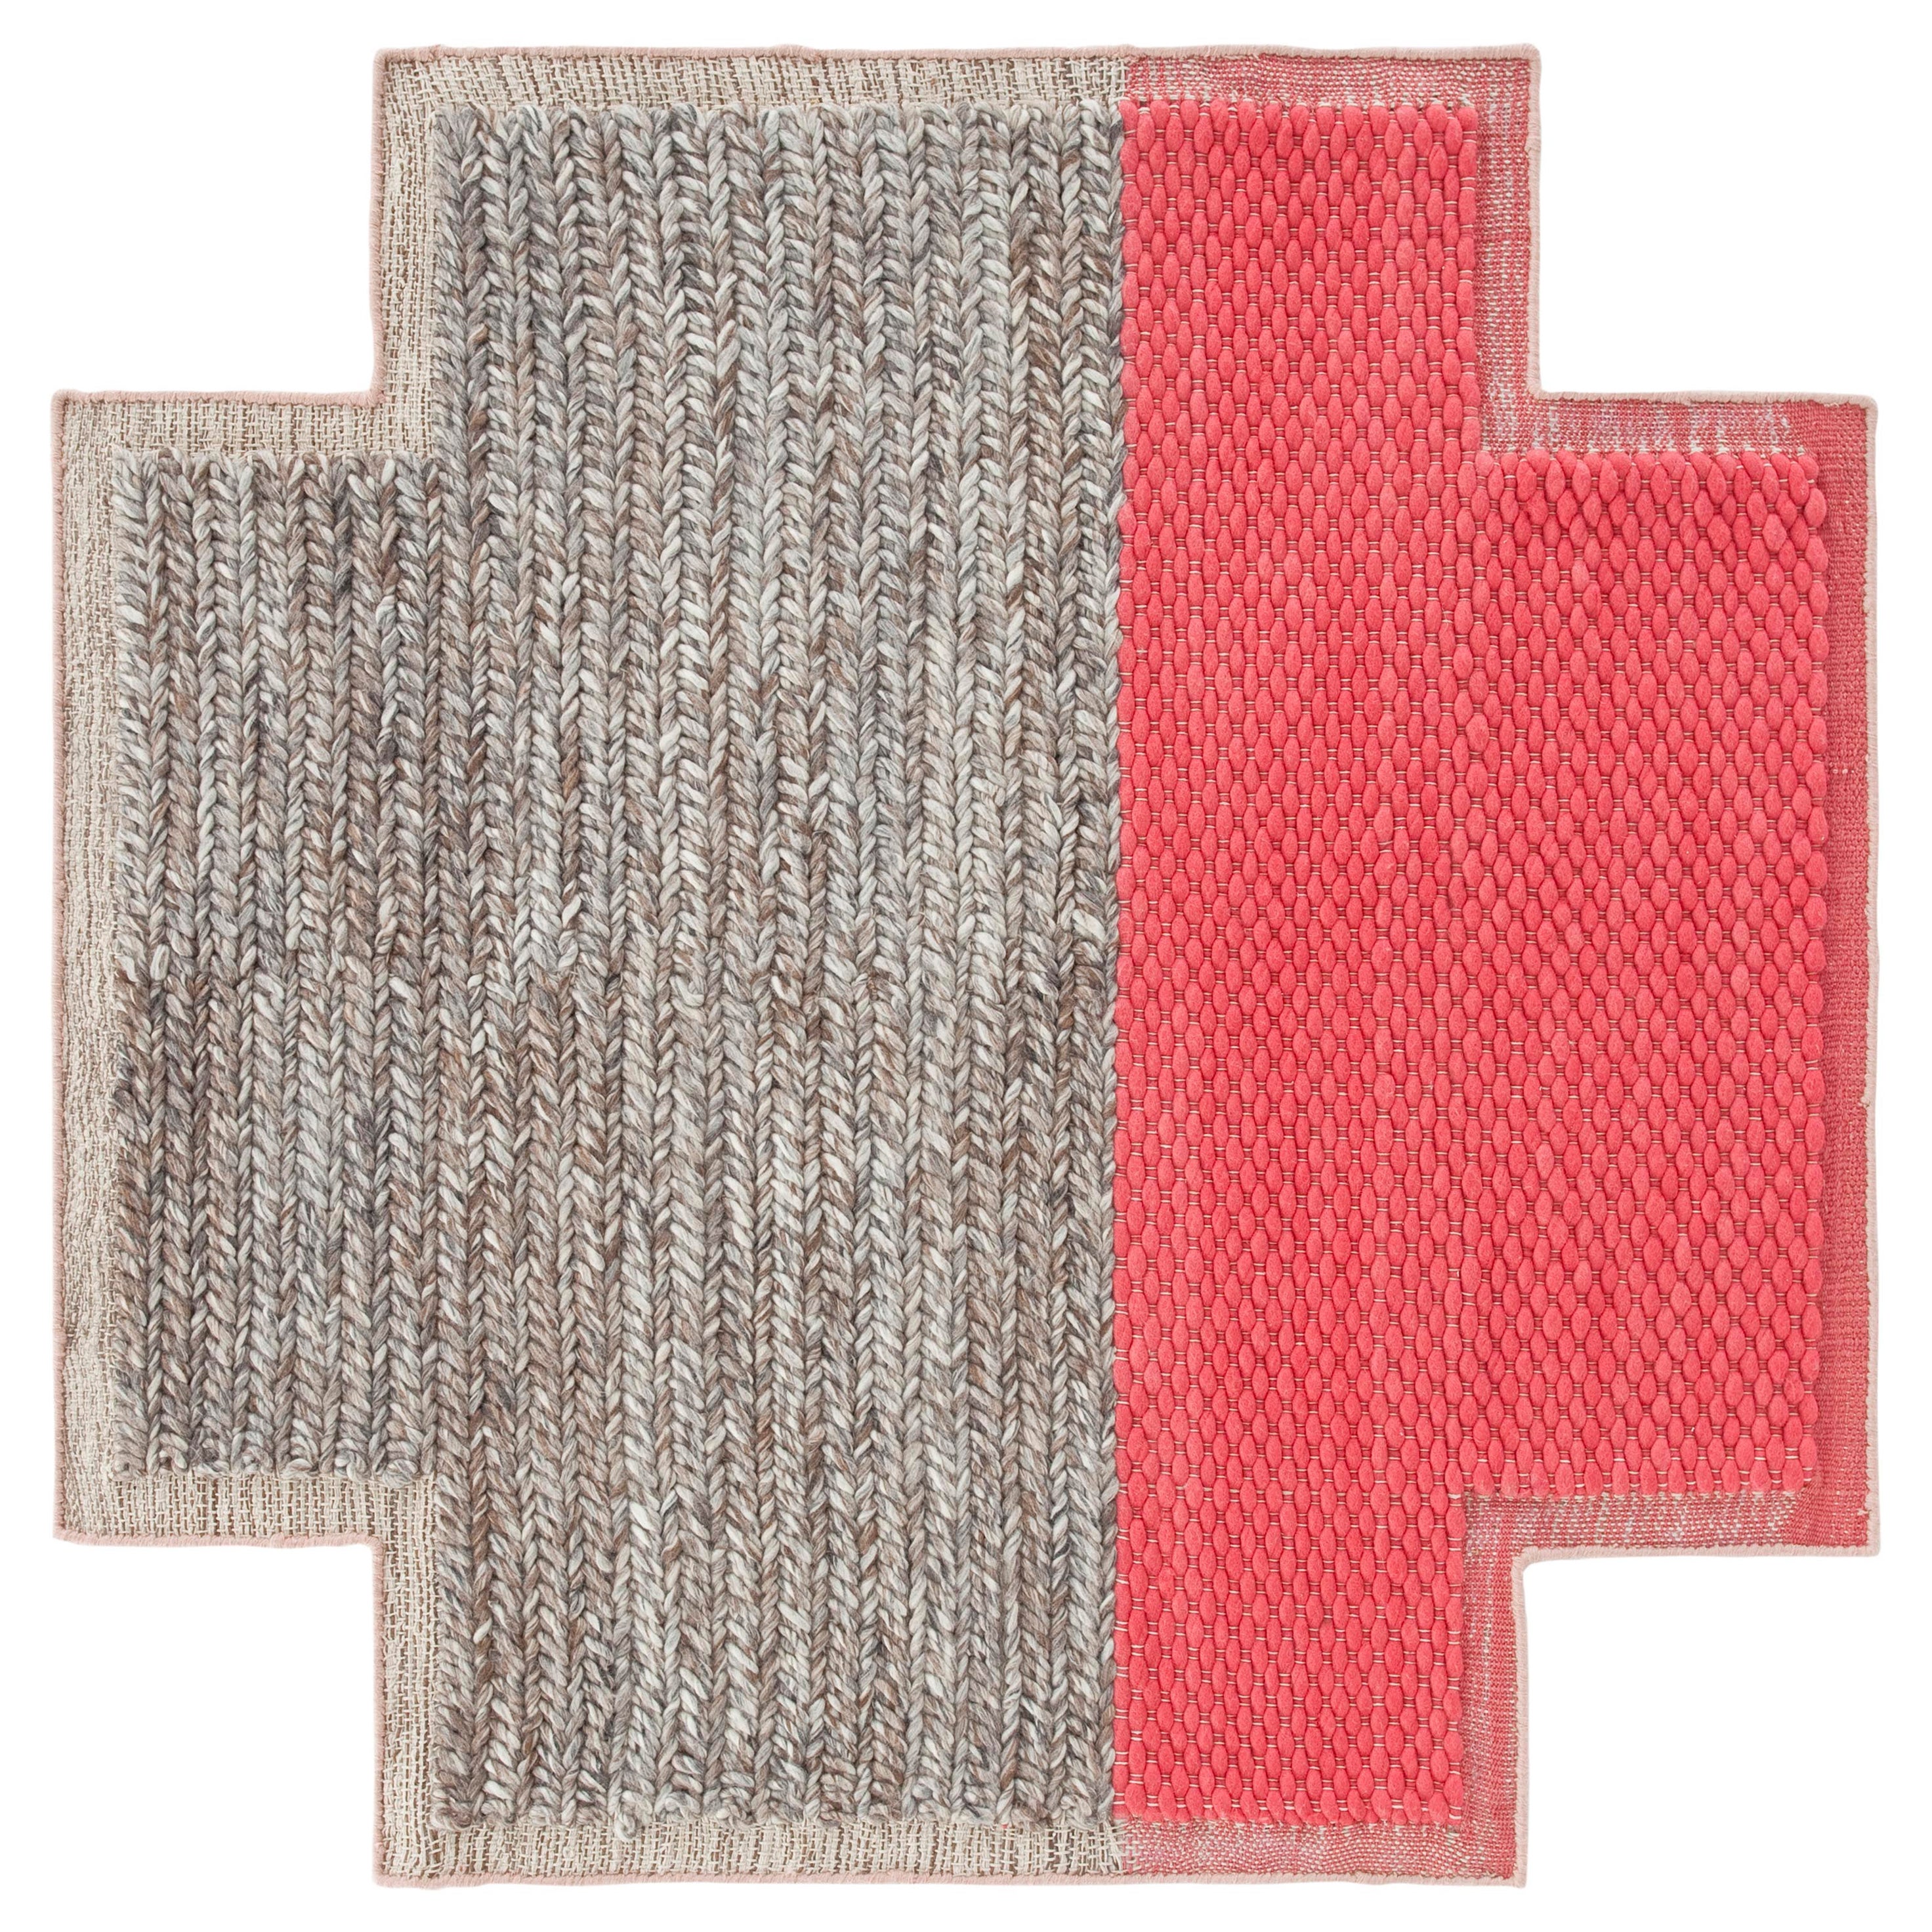 GAN Mangas Space Small Square Rug Plait in Coral by Patricia Urquiola For Sale